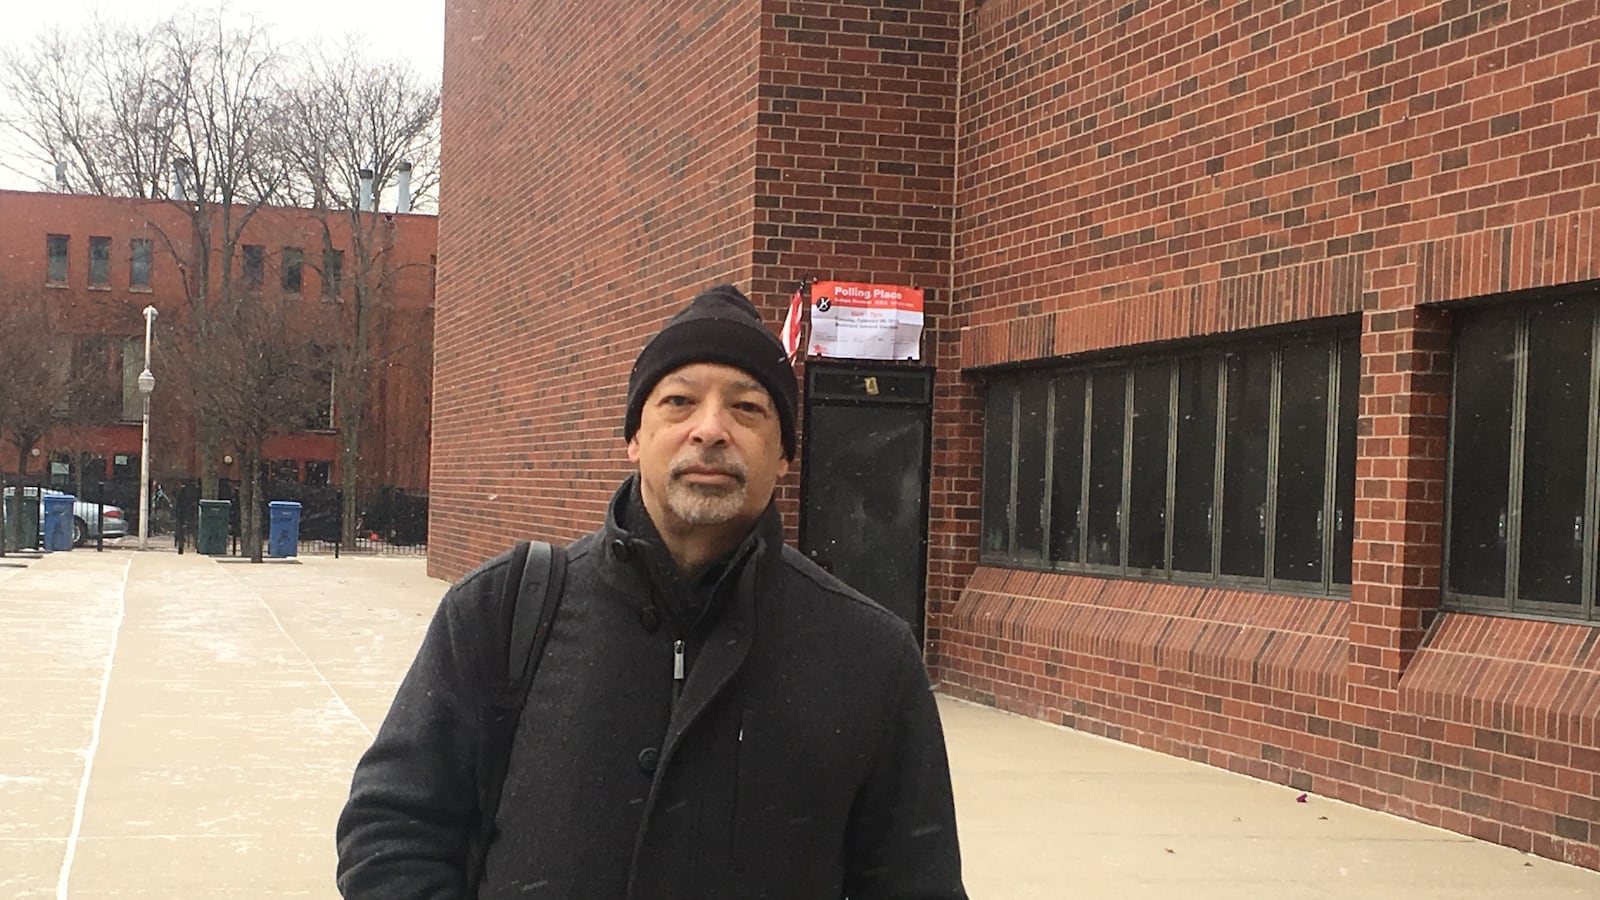 Chicago voter Chris Heron, 62, of the South Loop, said he was spurred by “the desire for change,” in voting for Lori Lightfoot for mayor in elections Feb. 26, 2019.